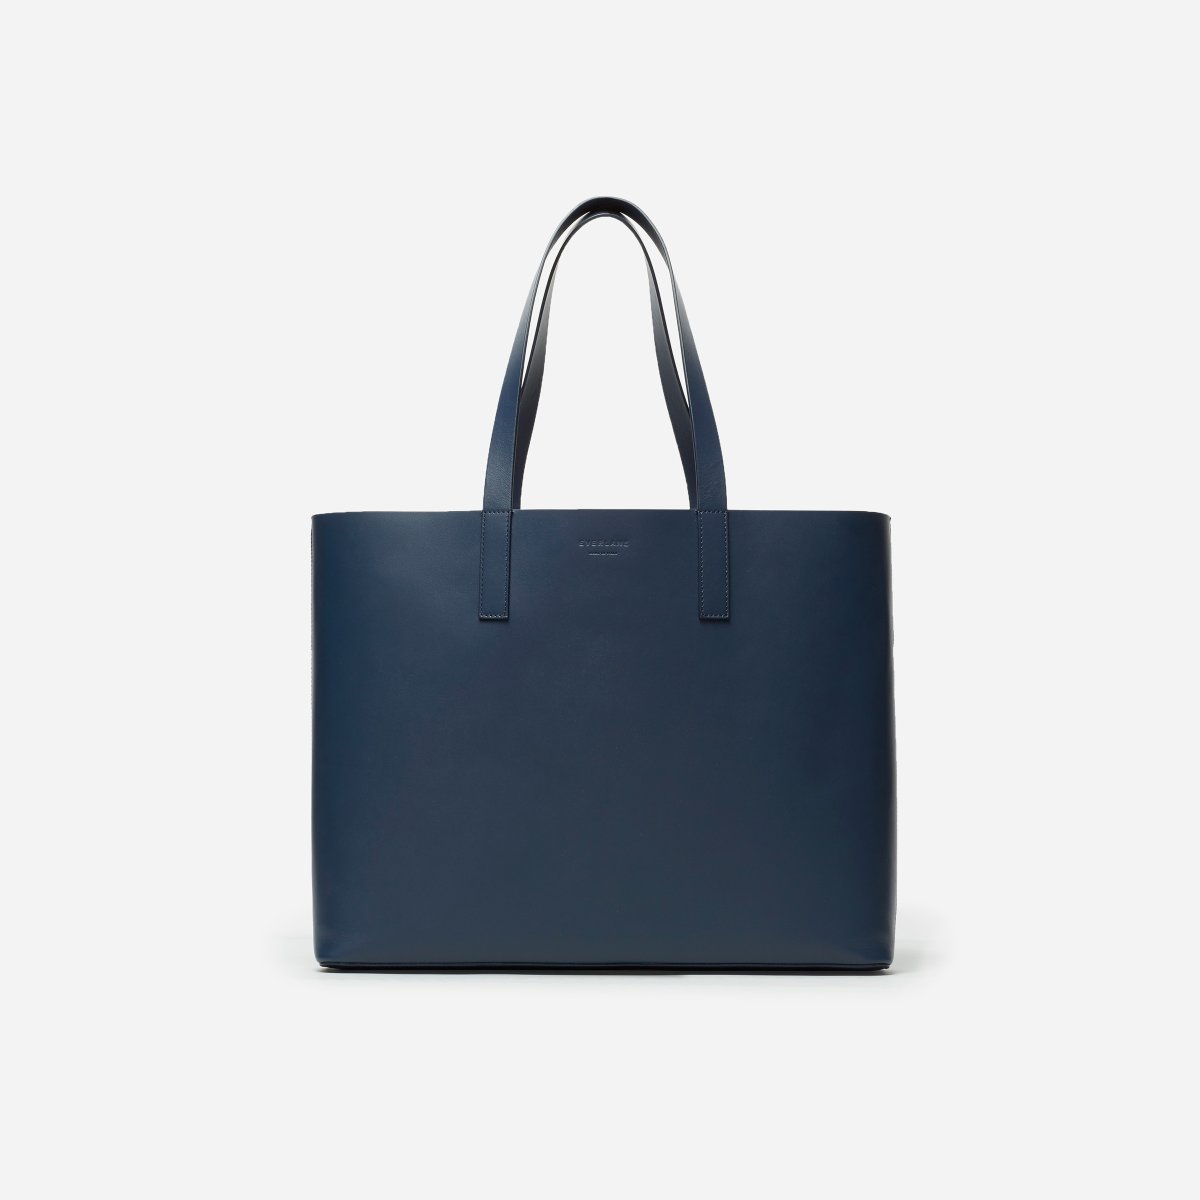 The Day Market Tote. Everlane, 2